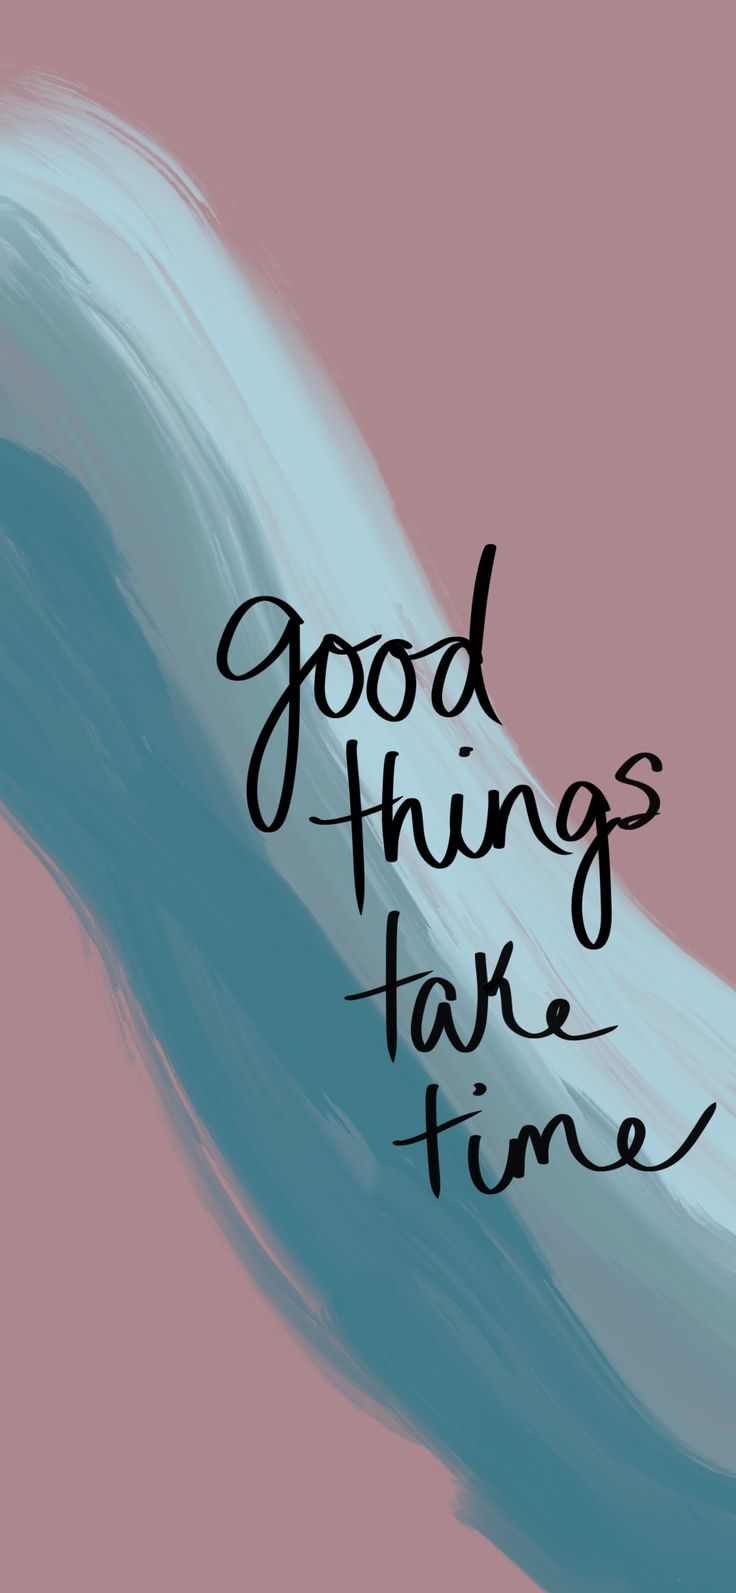 Wallpaper Background Screensaver. Positive quotes wallpaper, Good things take time, Inspirational quotes wallpaper